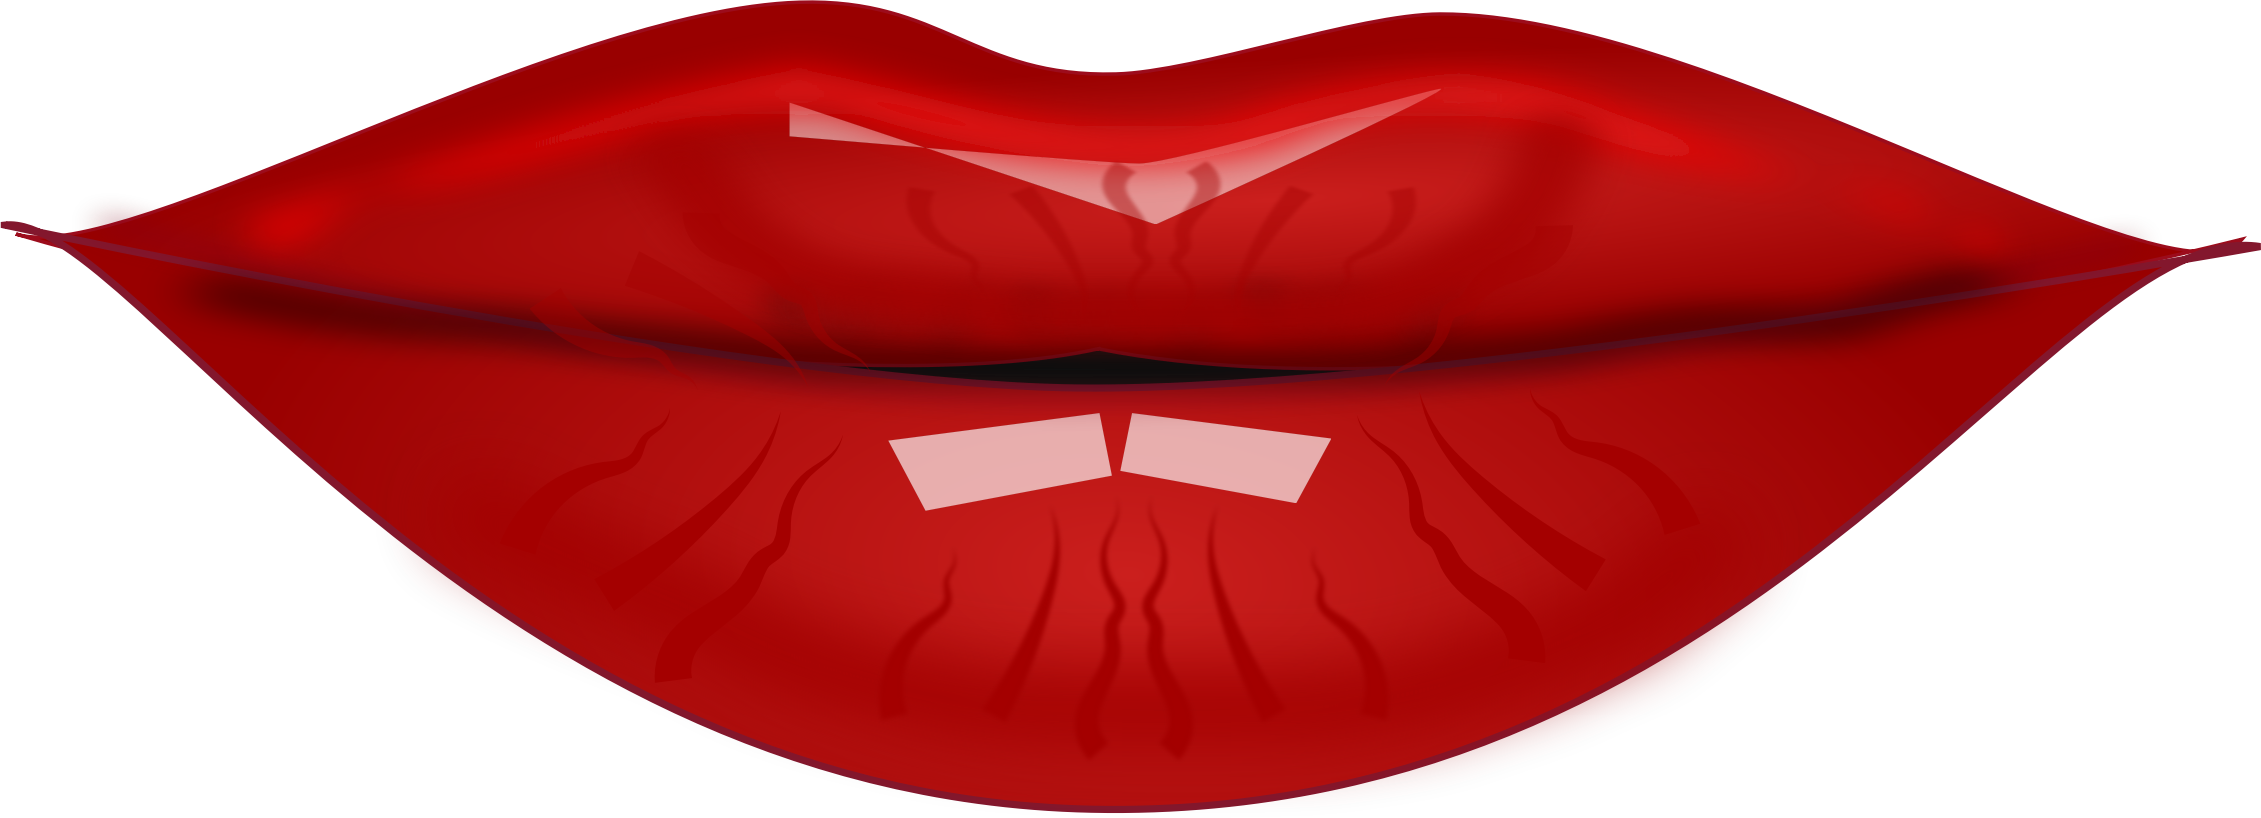 Lips Sass Mouths Matchmaking Gums PNG